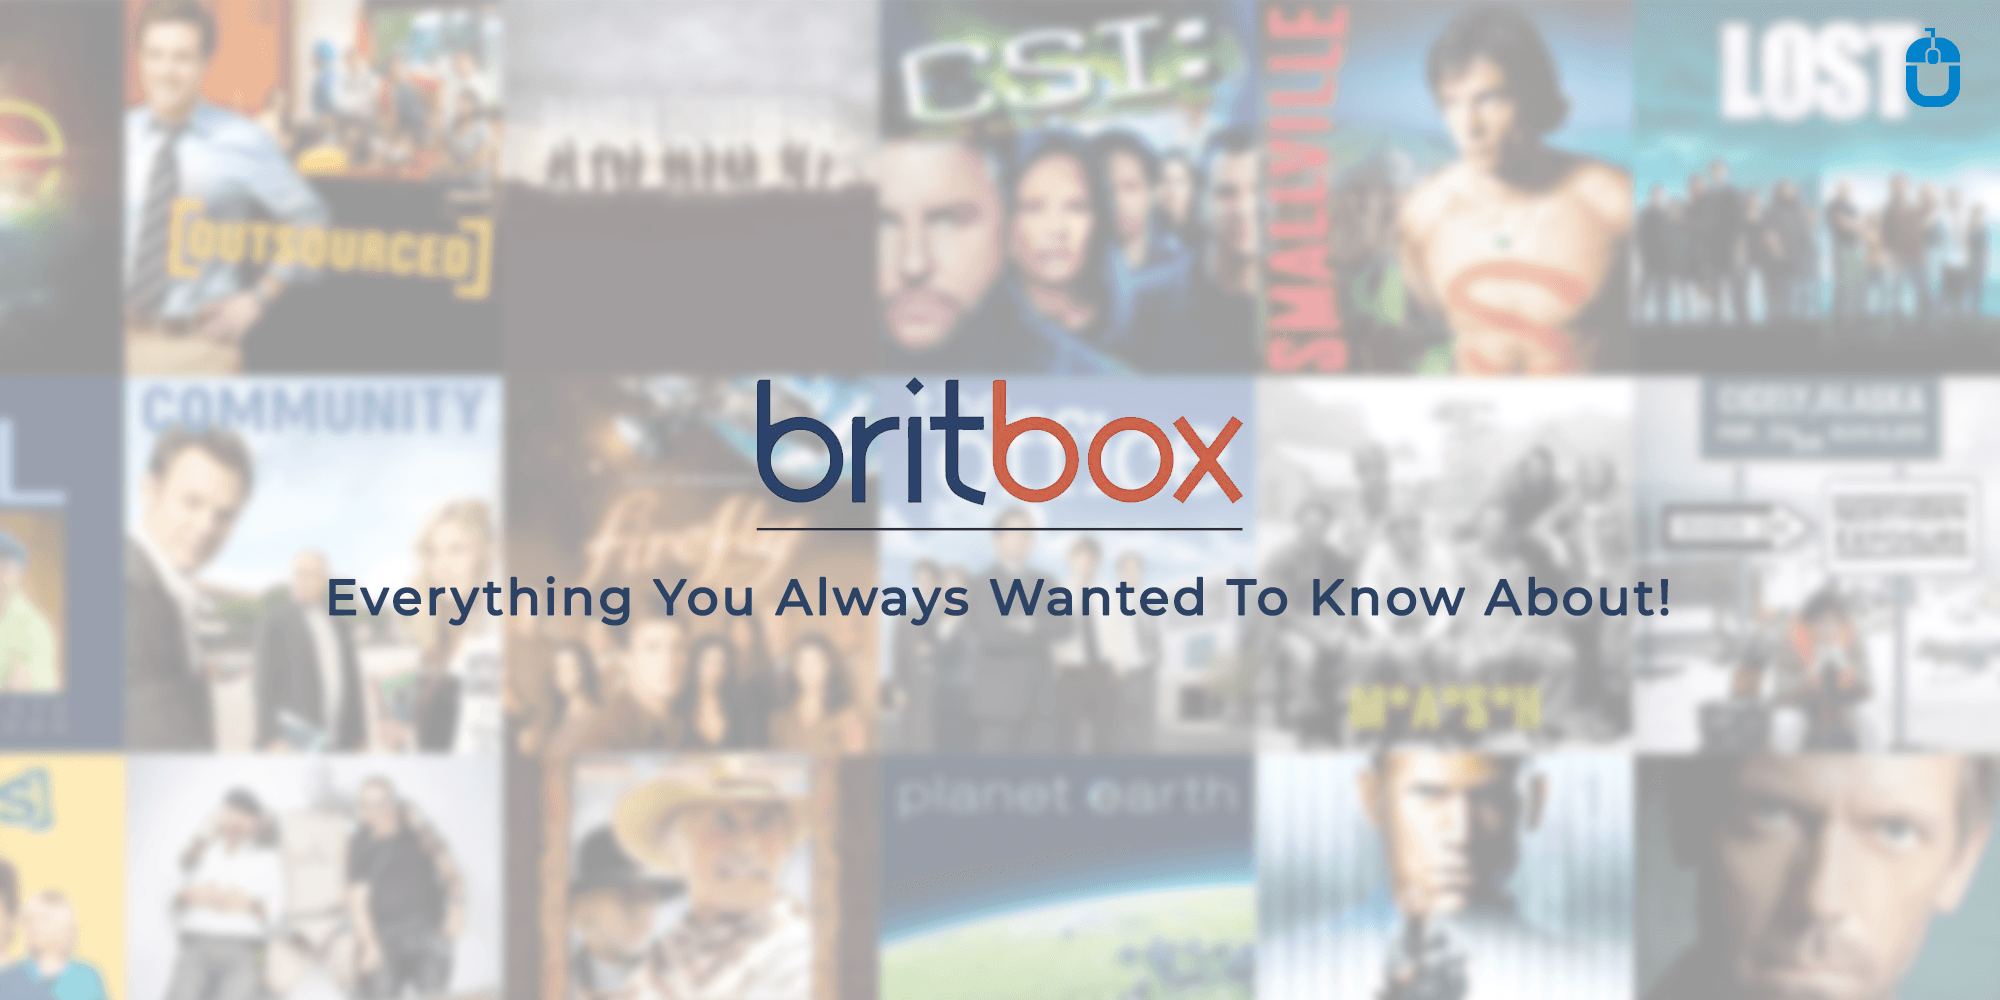 Britbox ; Everything You Always Wanted To Know About!